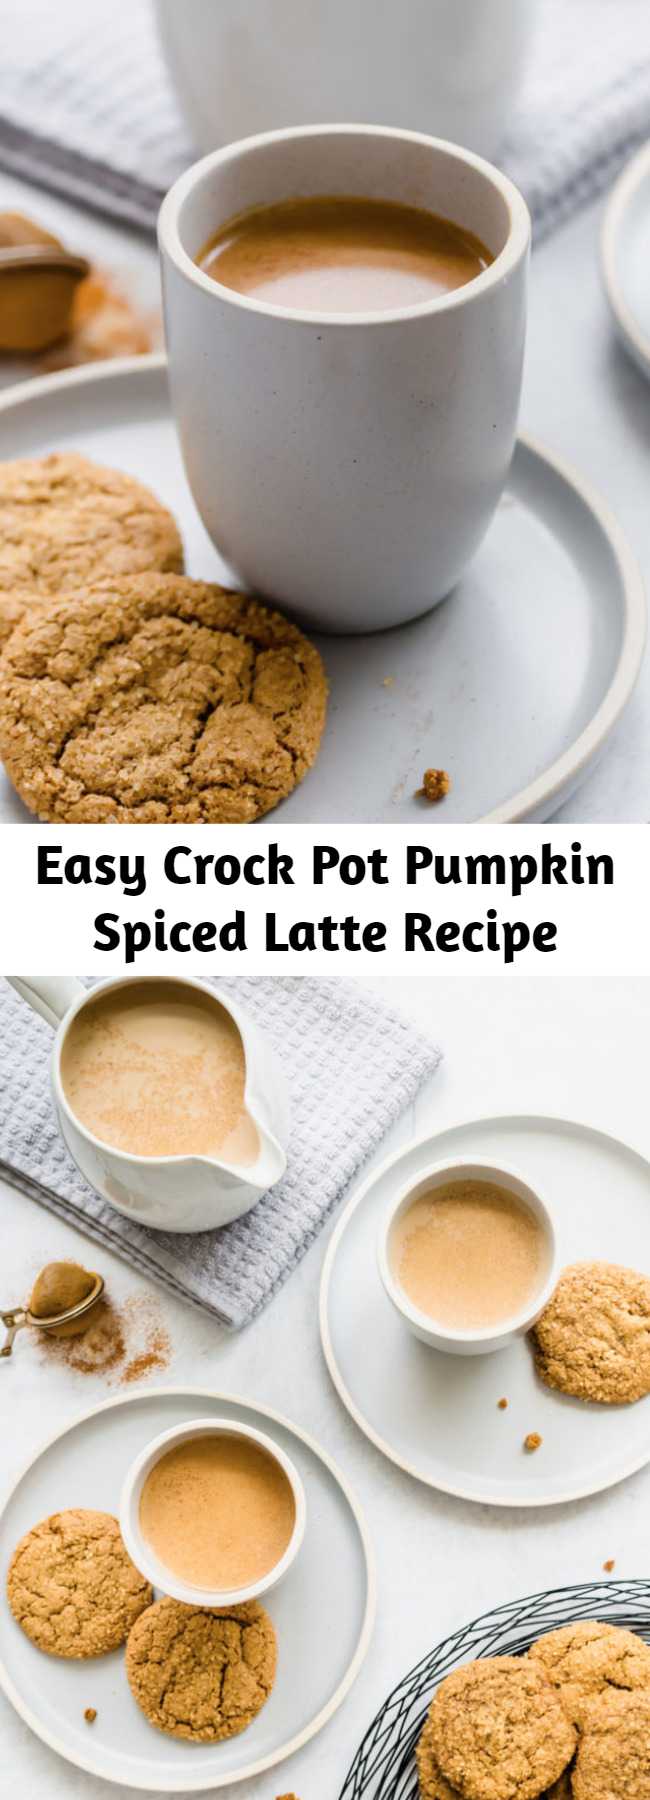 Easy Crock Pot Pumpkin Spiced Latte Recipe - This homemade Crock Pot Pumpkin Spice Latte is EASY to make and is my go-to drink when entertaining in the fall or winter. It’s made with REAL ingredients from your pantry and everyone loves it and is amazed that it’s made in a slow cooker.